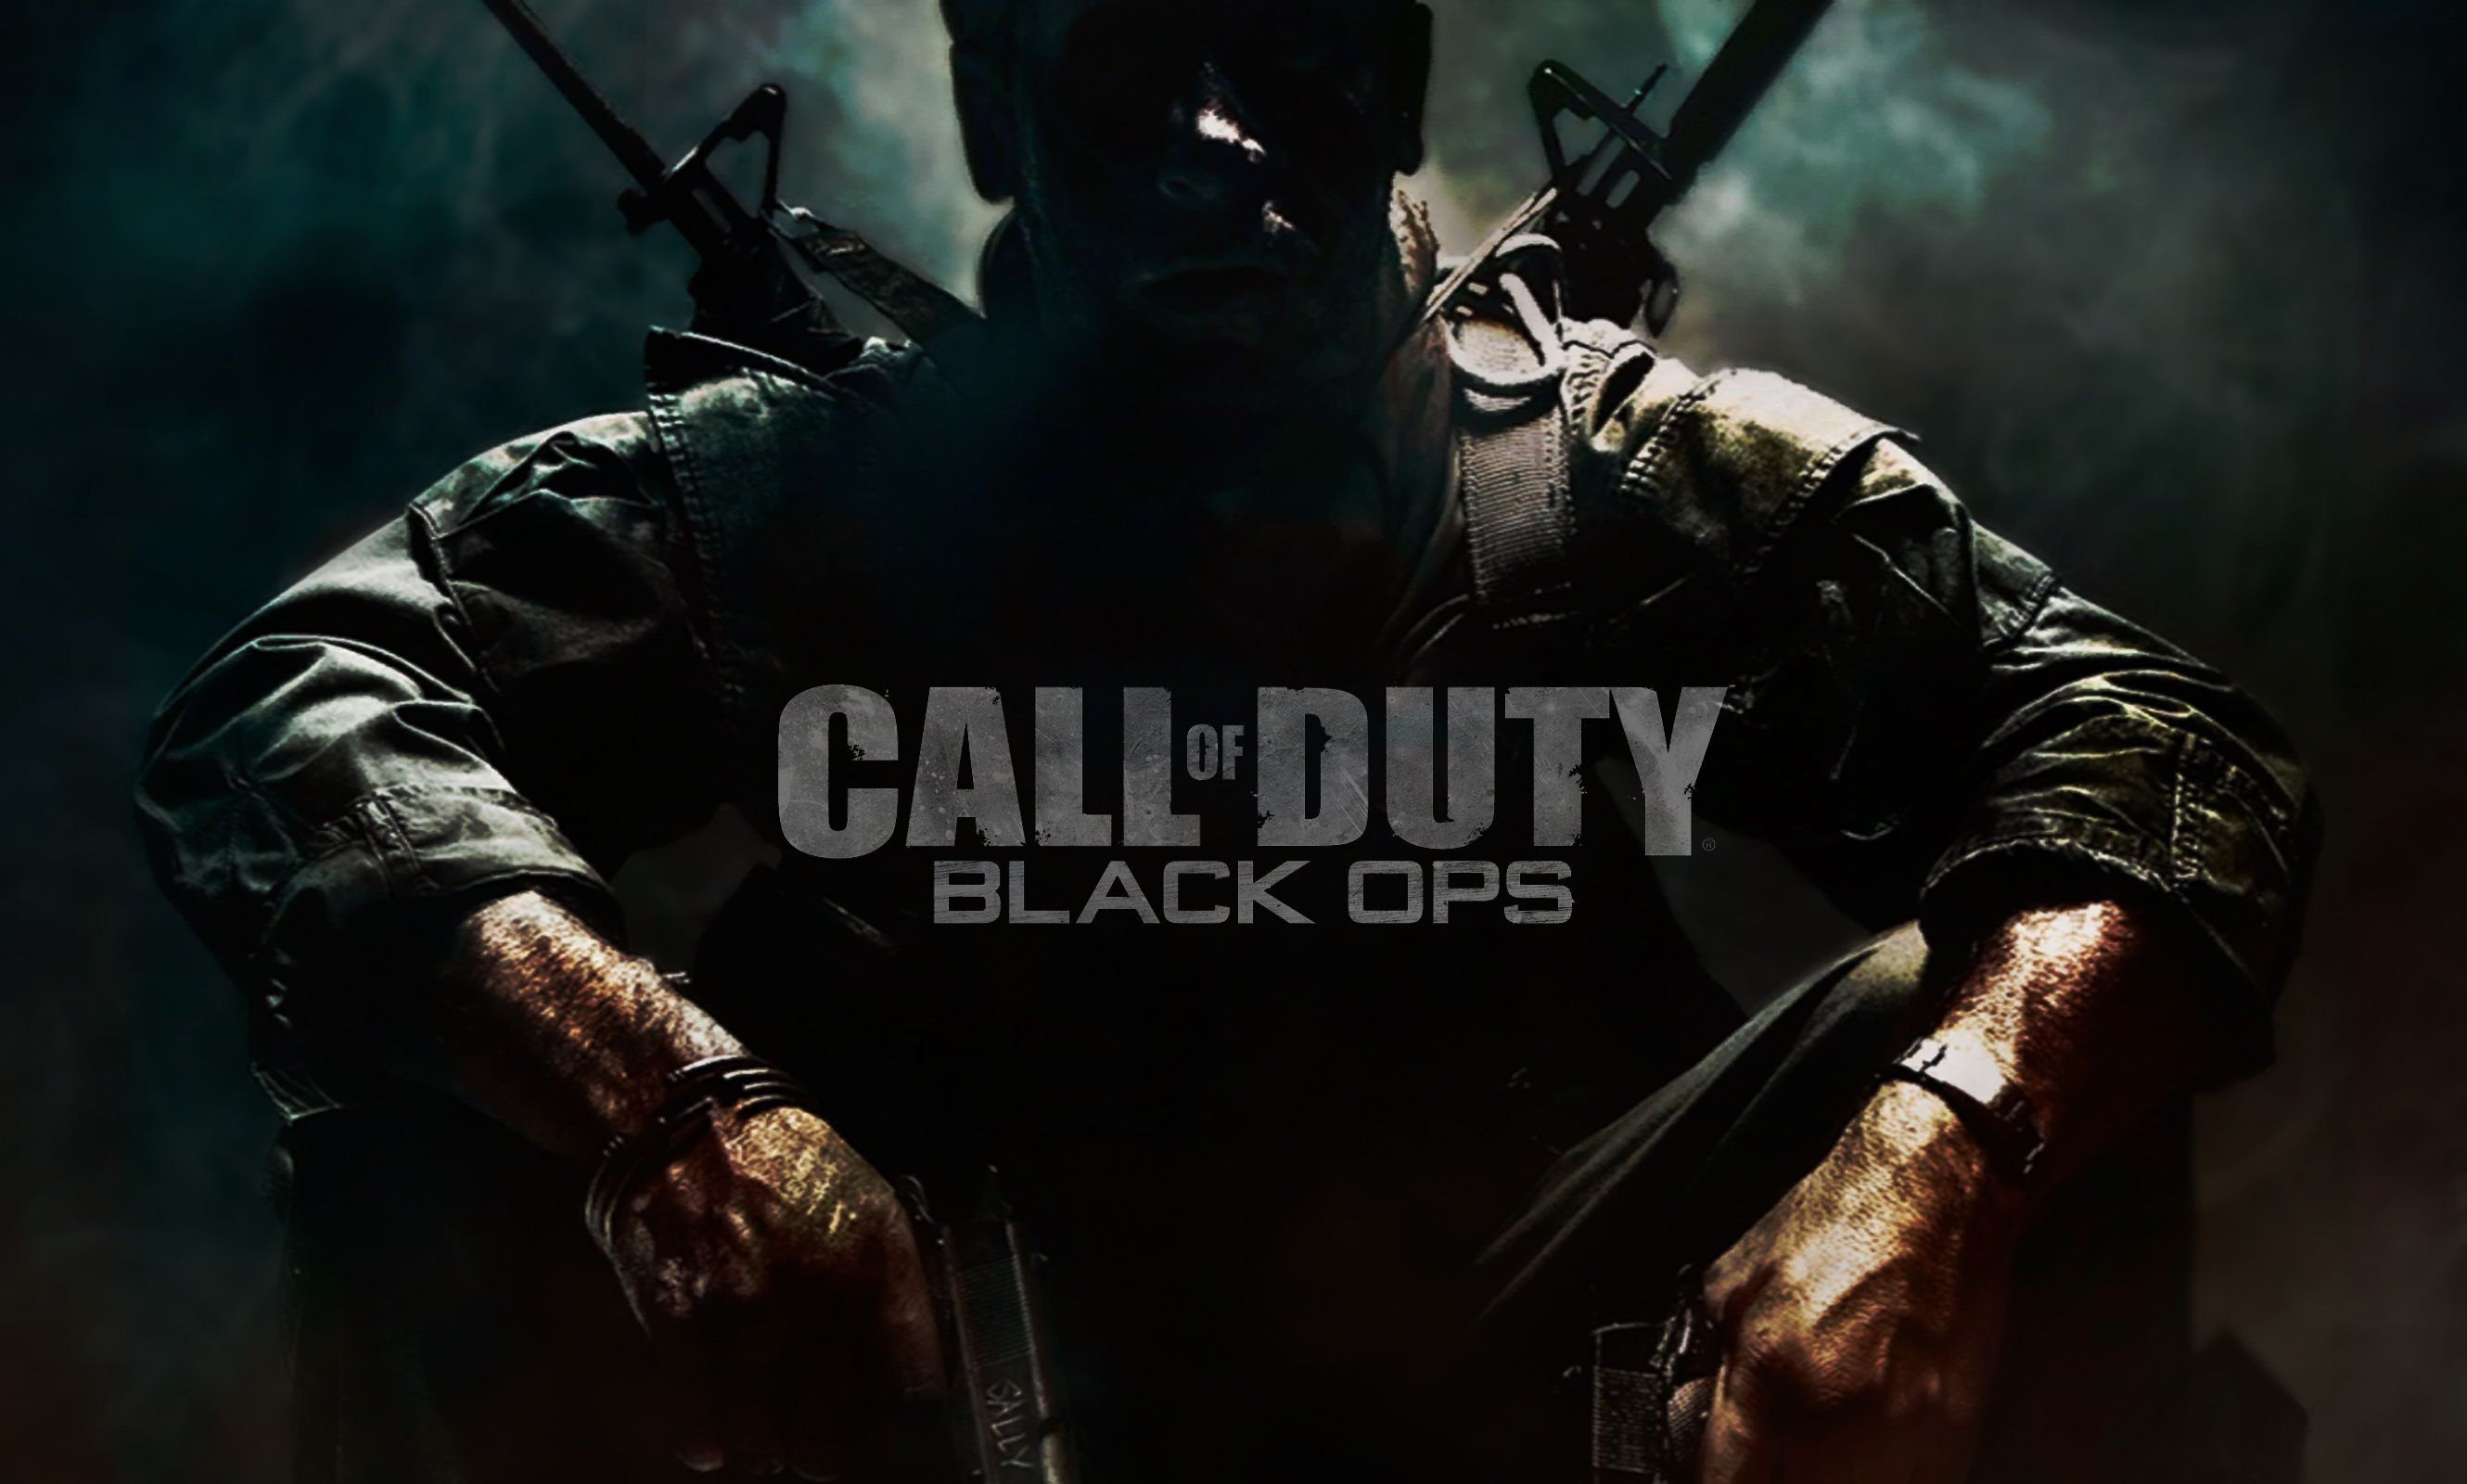 CoD Black Ops Wallpaper 02 by iFoXx360